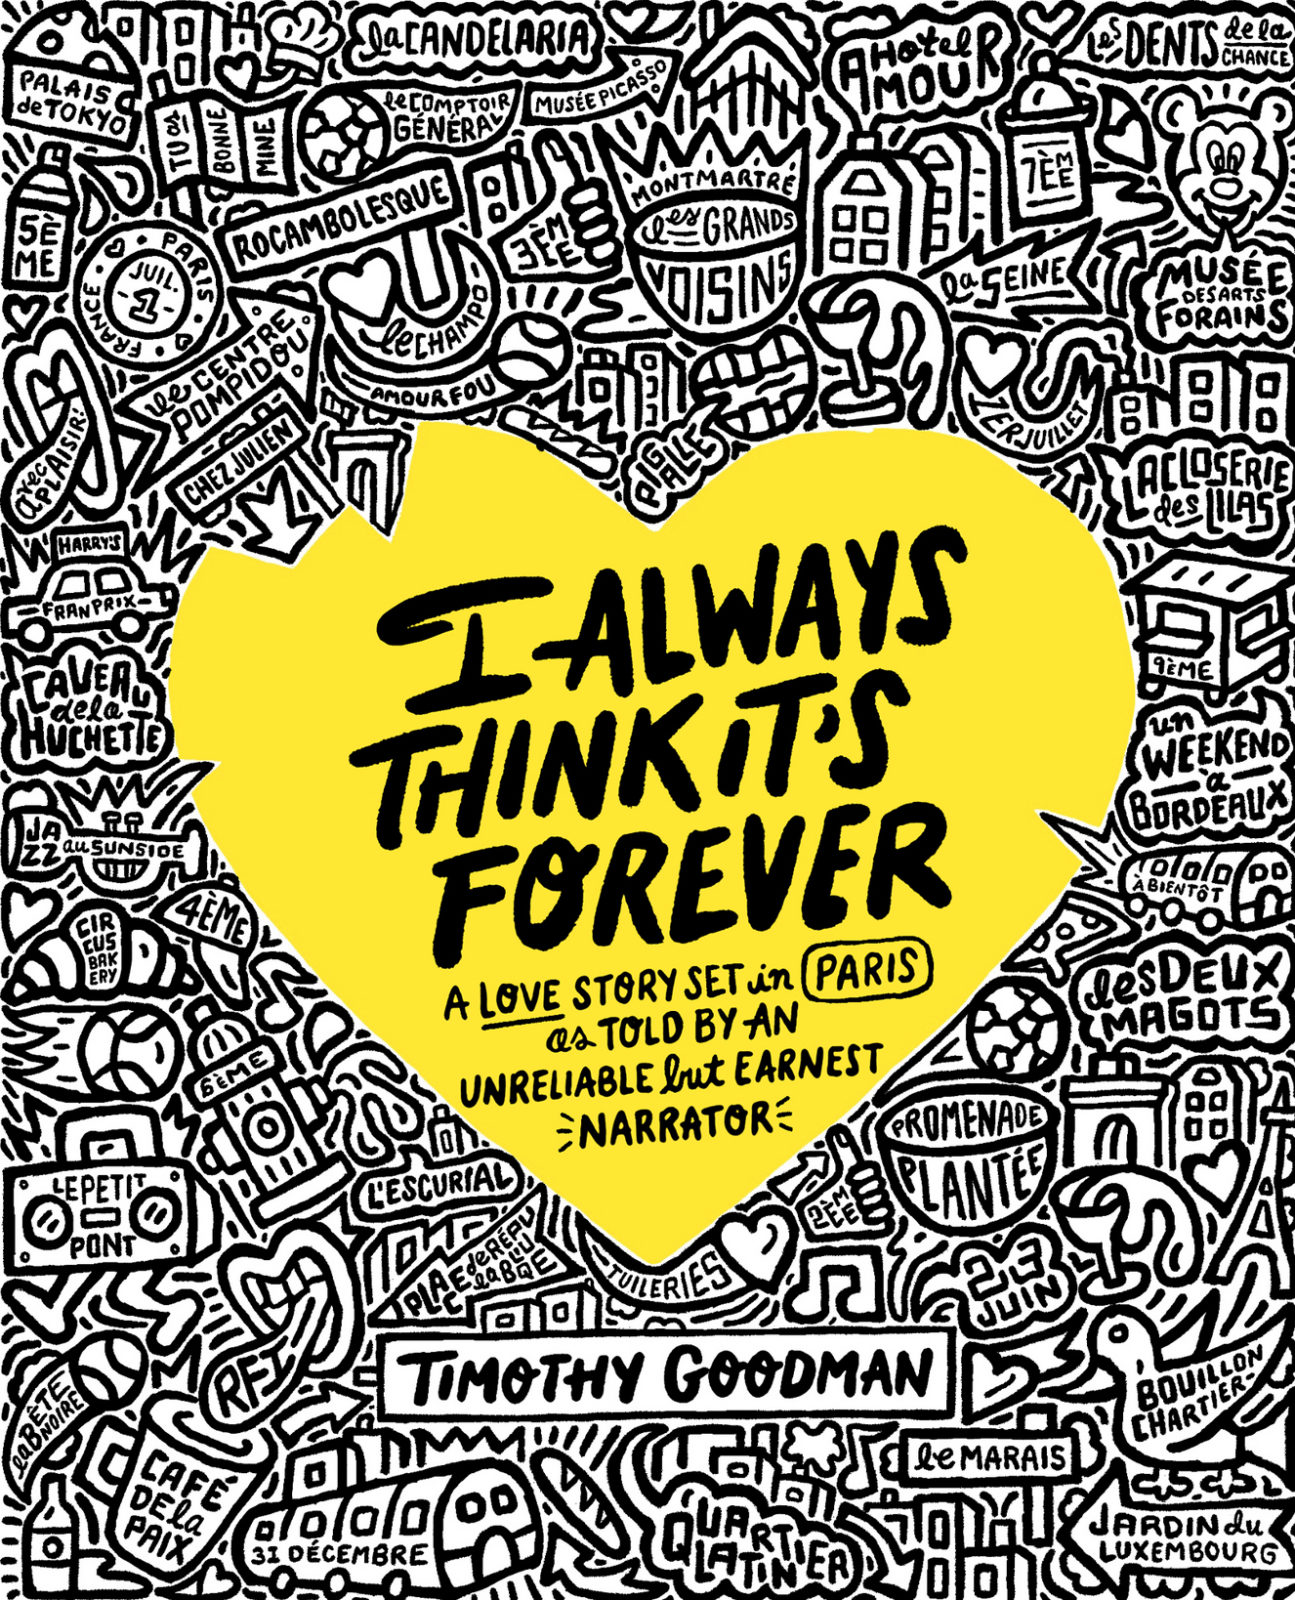 Cover of Timothy Goodman's book, I Always Think It's Forever: A Love Story Set in Paris as Told by an Unreliable but Earnest Narrator (A Memoir).